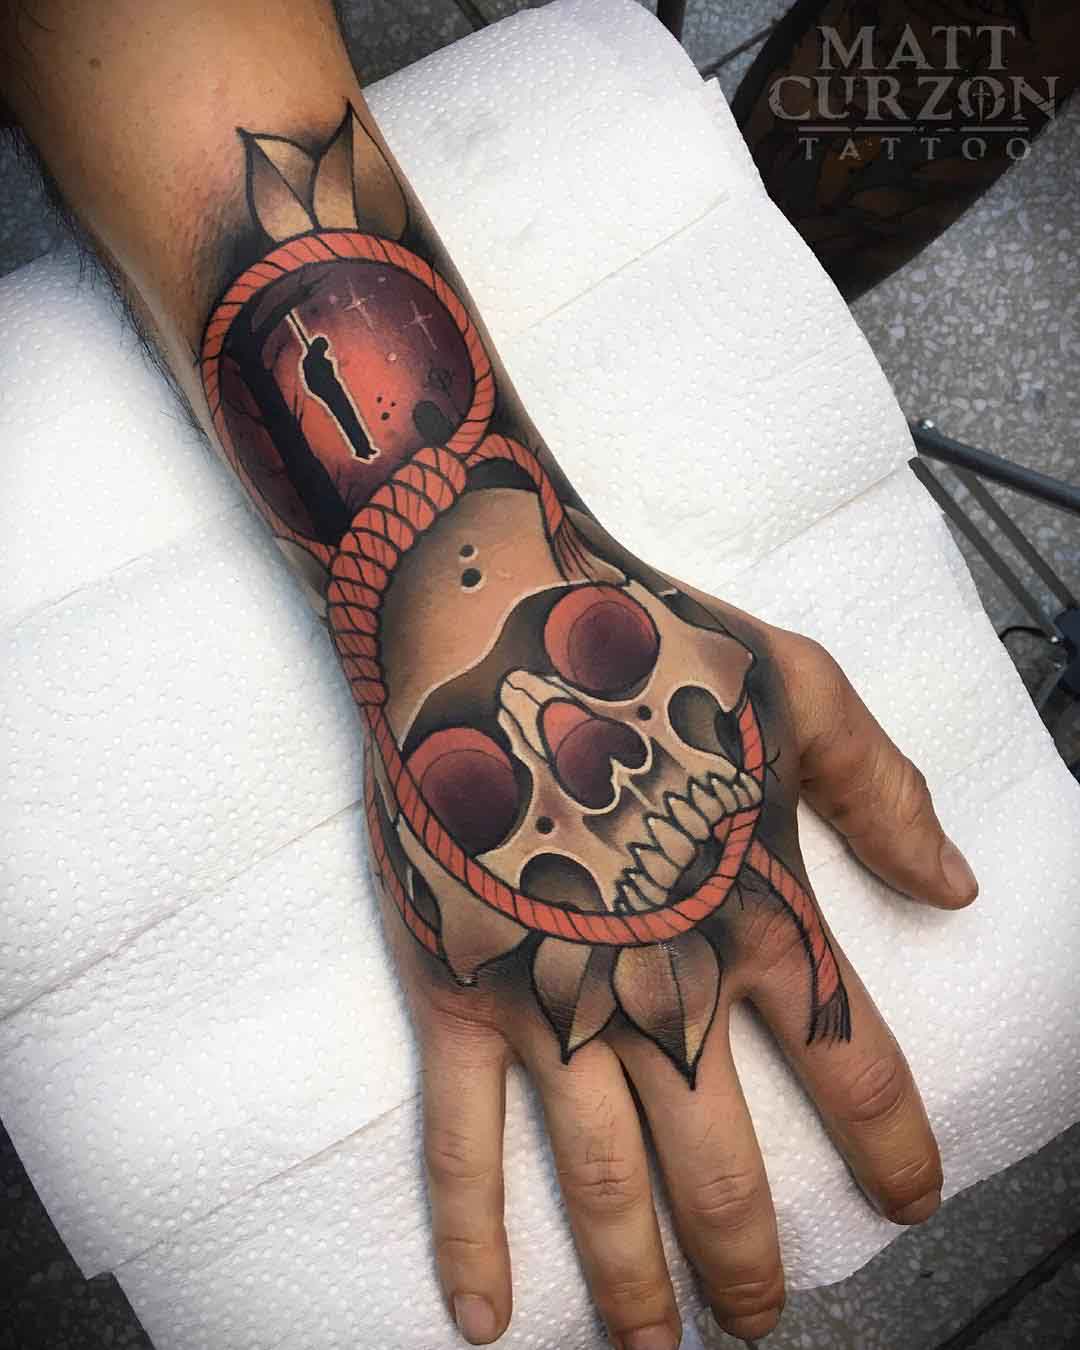 skull tattoo on hand with rope and hanged man